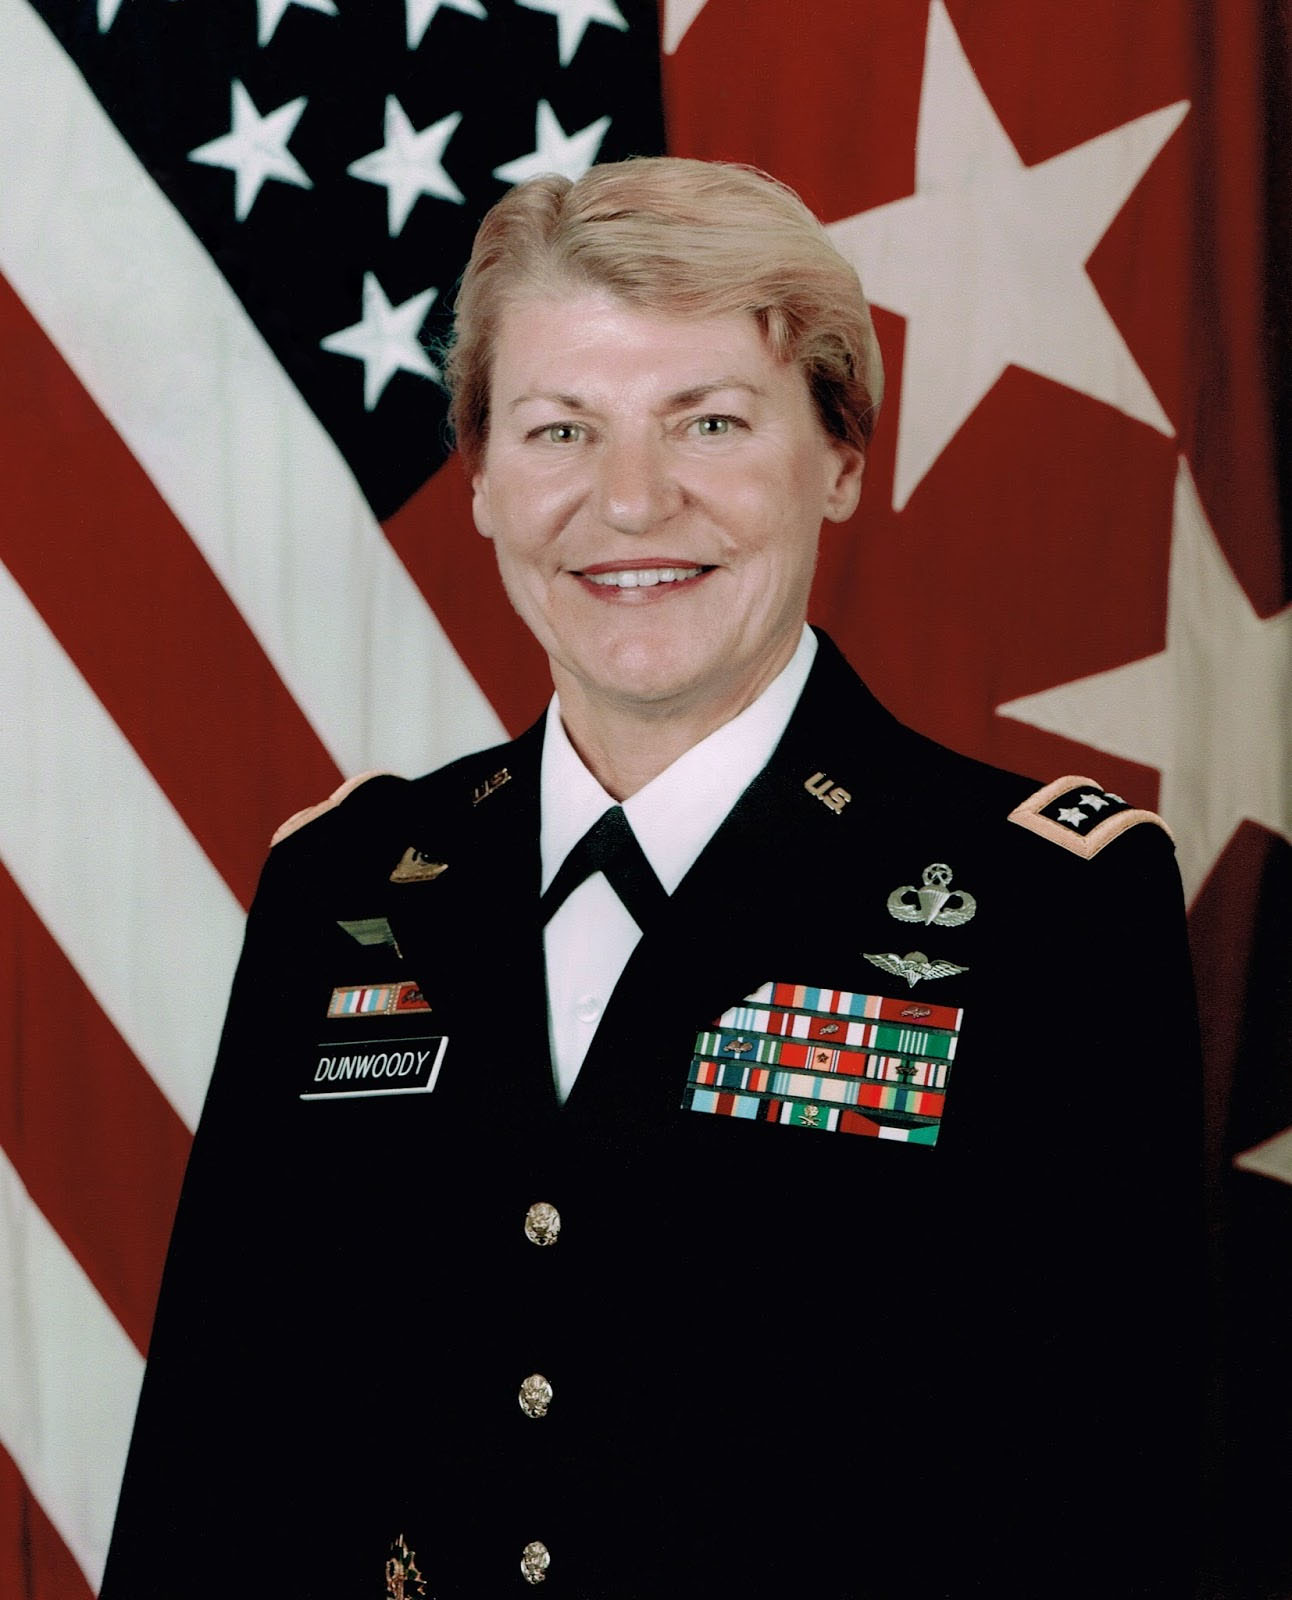 General Anne E. Dunwoody, one of many amazing women in the military